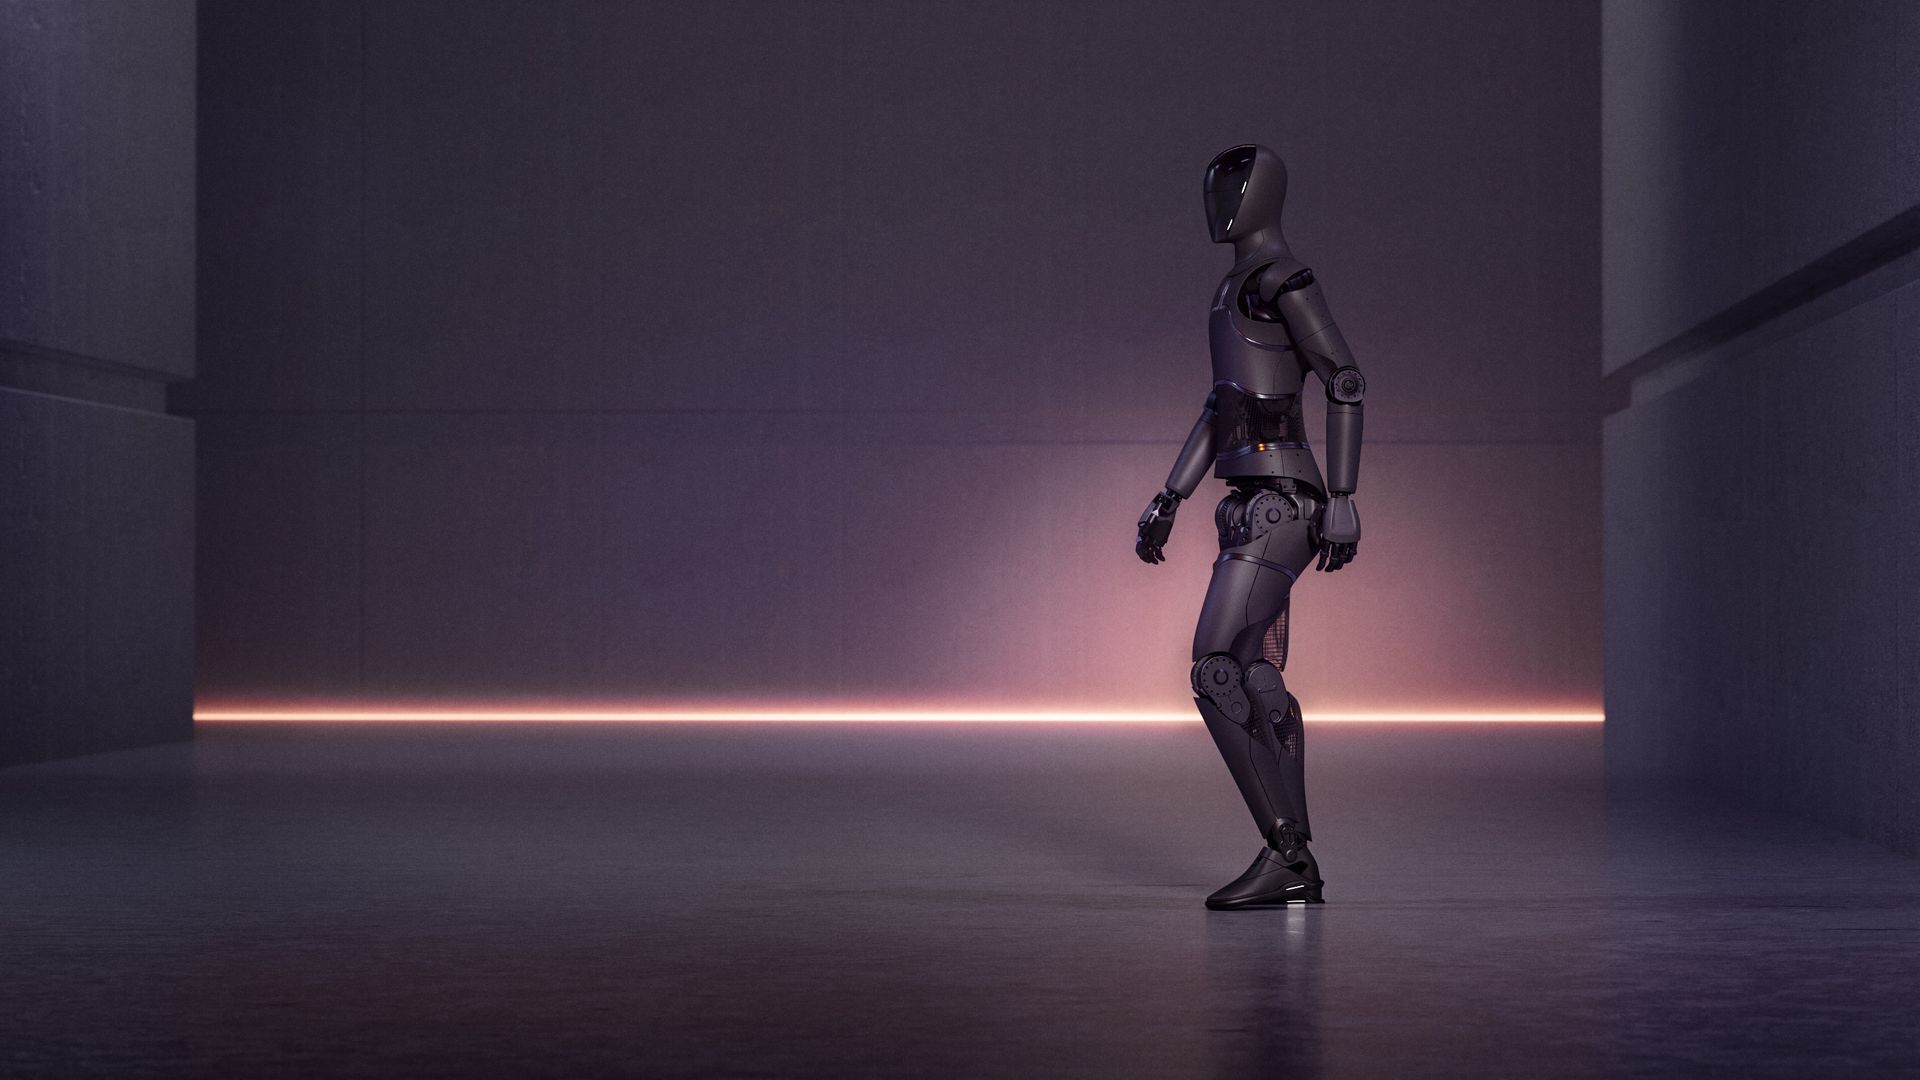 A rendering of Figure 01, a humanoid robot being built by a startup called Figure.